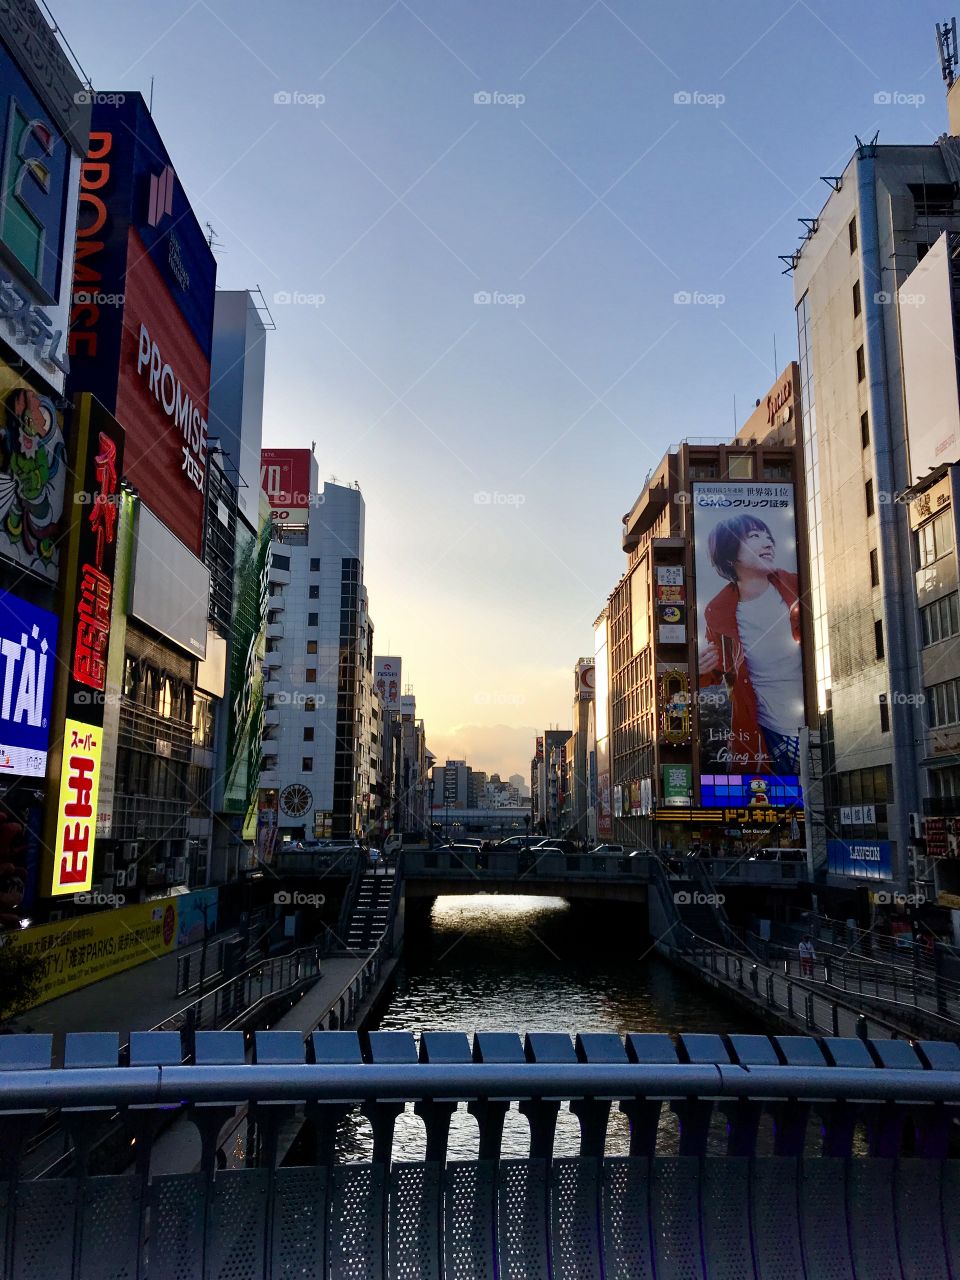 When i was walking down osaka, i took recognize of this bridge and its beautiful look out. The buildings and colors coordinated beautifully and ends with a nice view of dawn. I thought it looked like it came out straight out of an anime. 